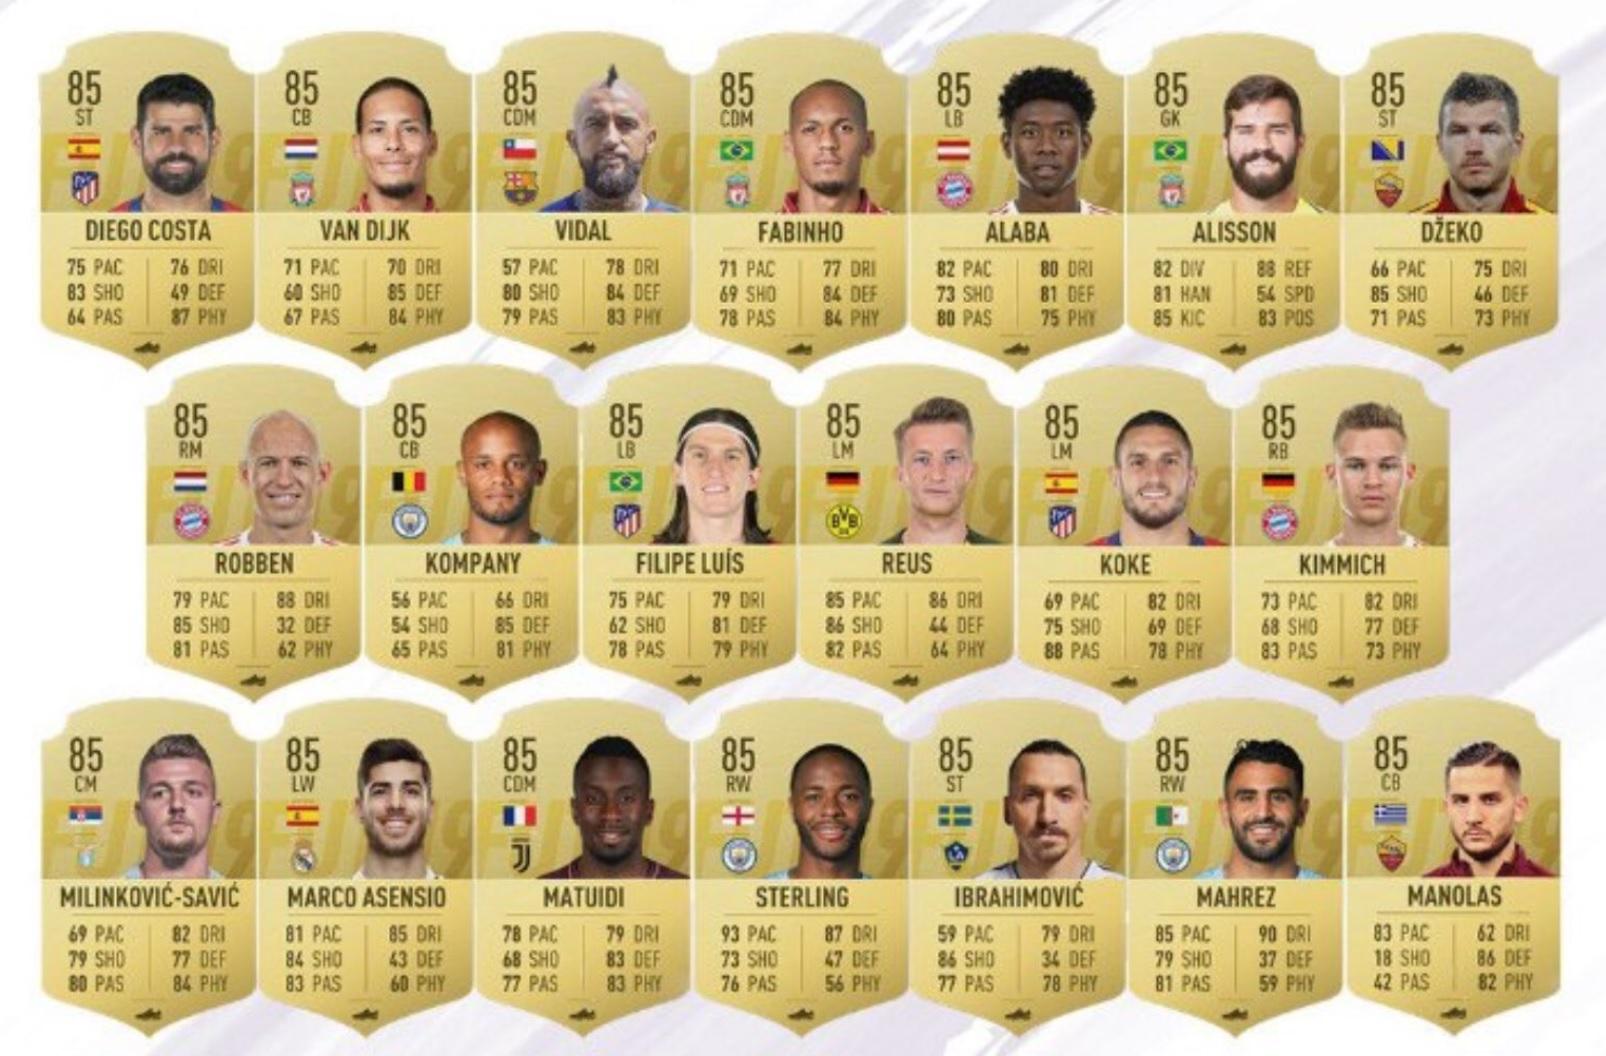 Several Premier League stars feature in EA Sports' Fifa 19 player ratings